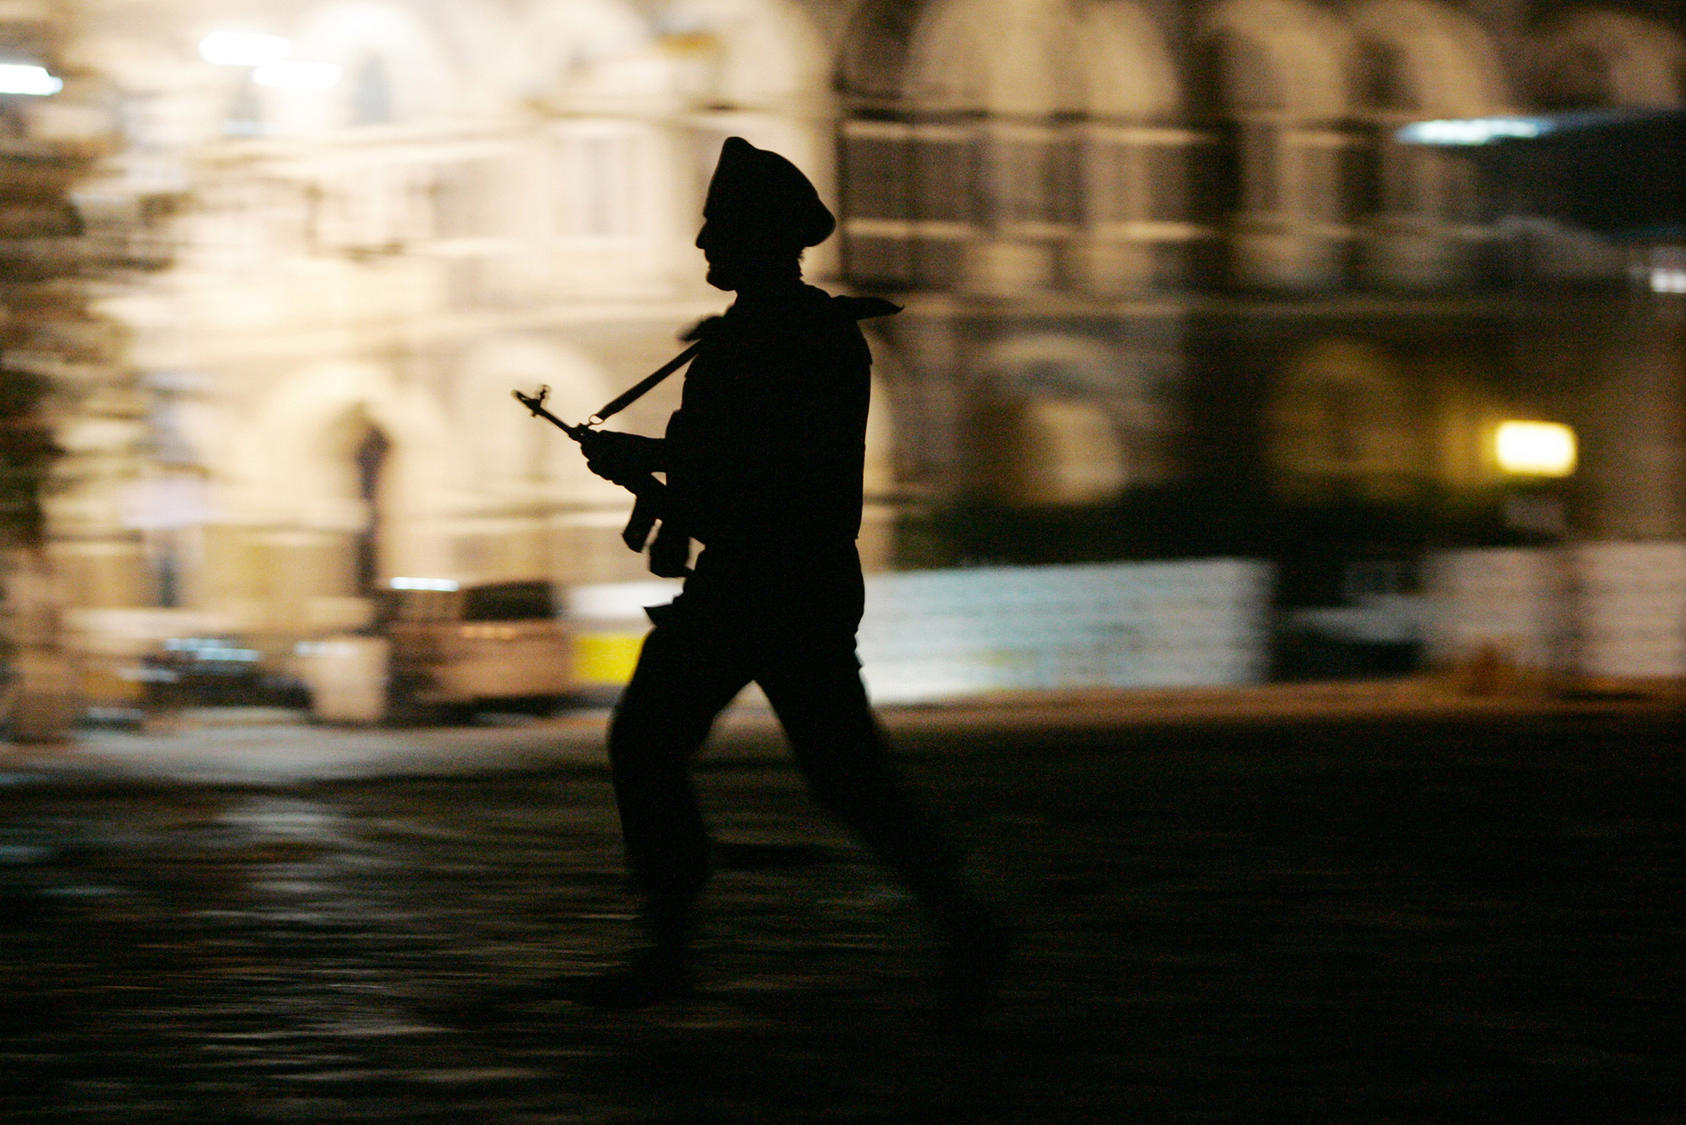 A soldier runs across the courtyard in front of the Taj Mahal Palace & Tower hotel in Mumbai, India, on Friday night, Nov. 28, 2008. (Amiran White/The New York Times)